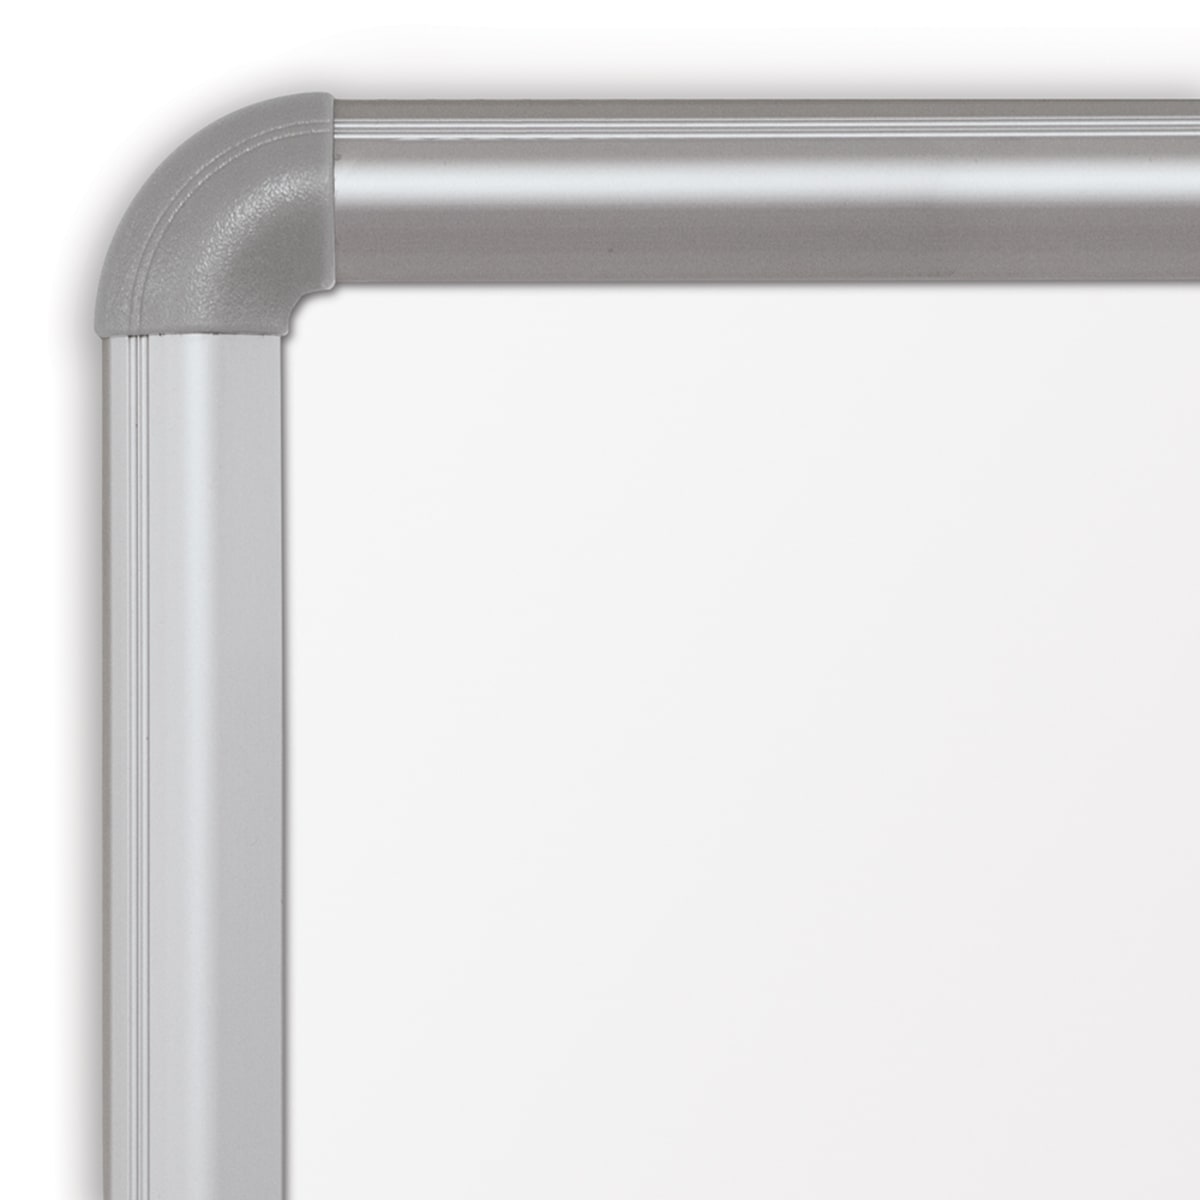 Mooreco Magne-Rite Whiteboard - Presidential Trim (Silver) 2'H x 3'W (Mooreco 219PB) - SchoolOutlet